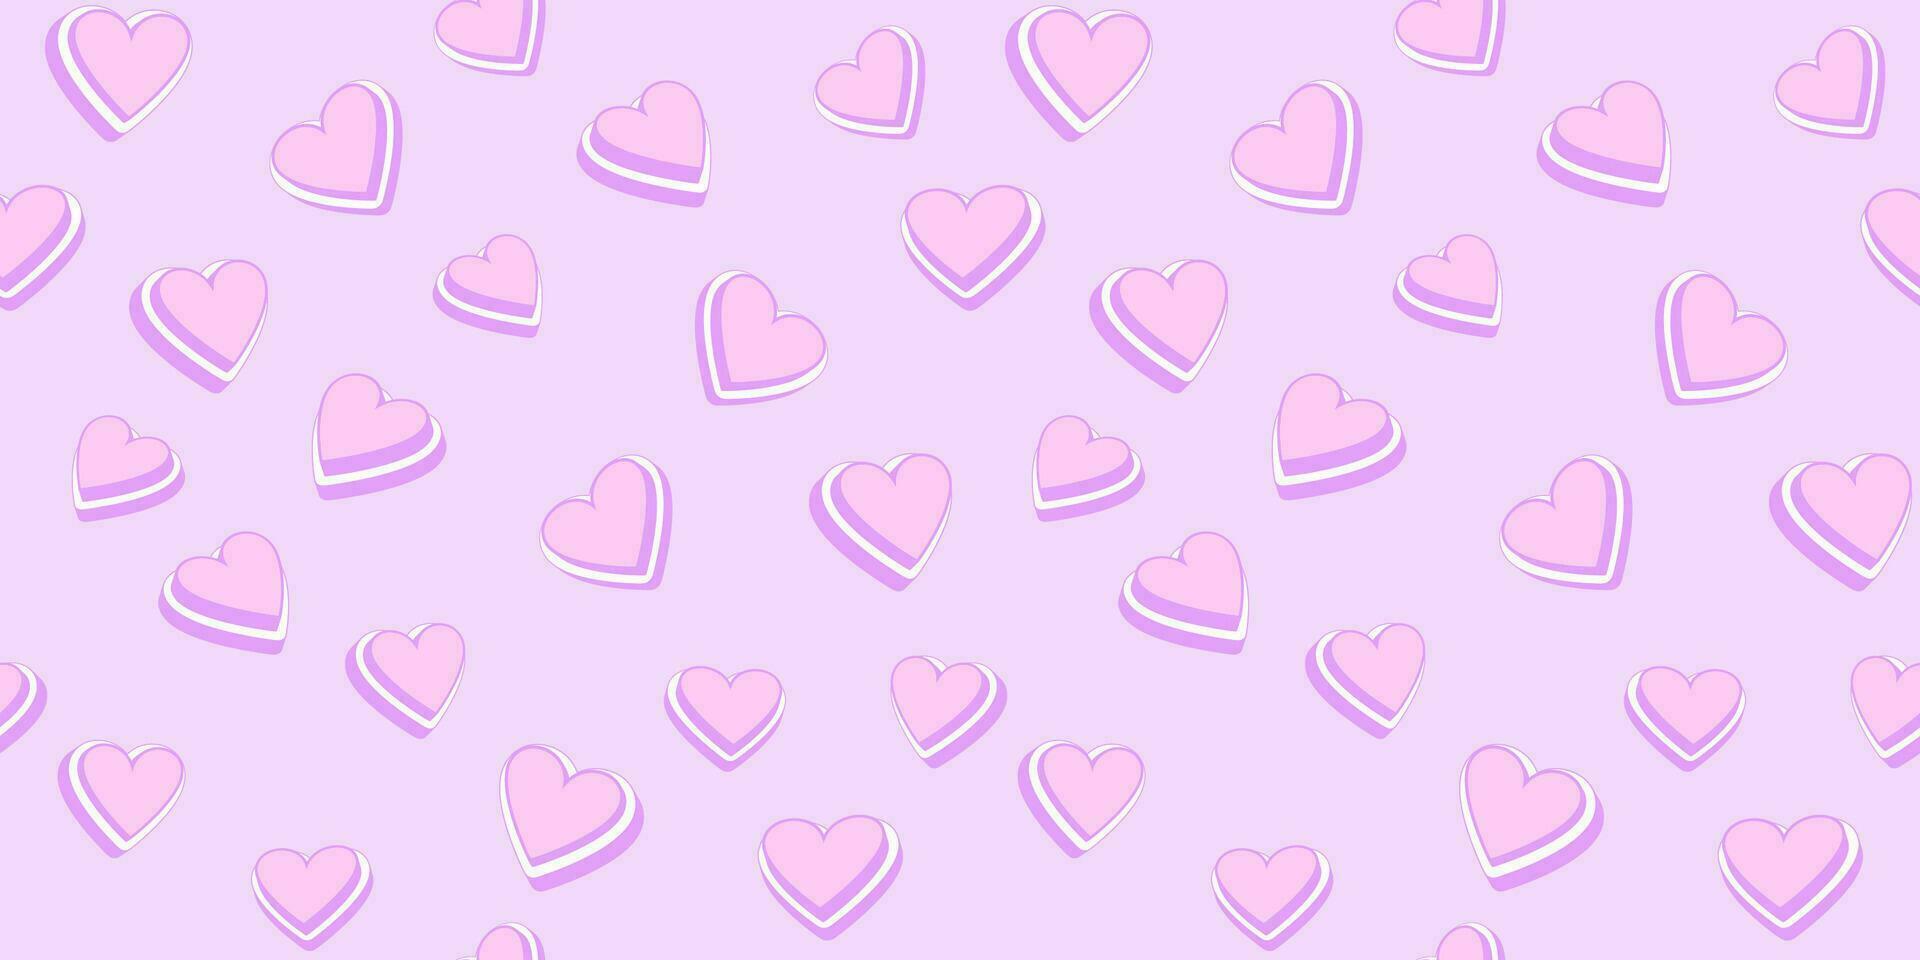 Monochrome pastel gently purple pattern hearts background. Vector cute hearts intertwined in a seamless pattern. Template for hearts textile design, paper, wallpaper